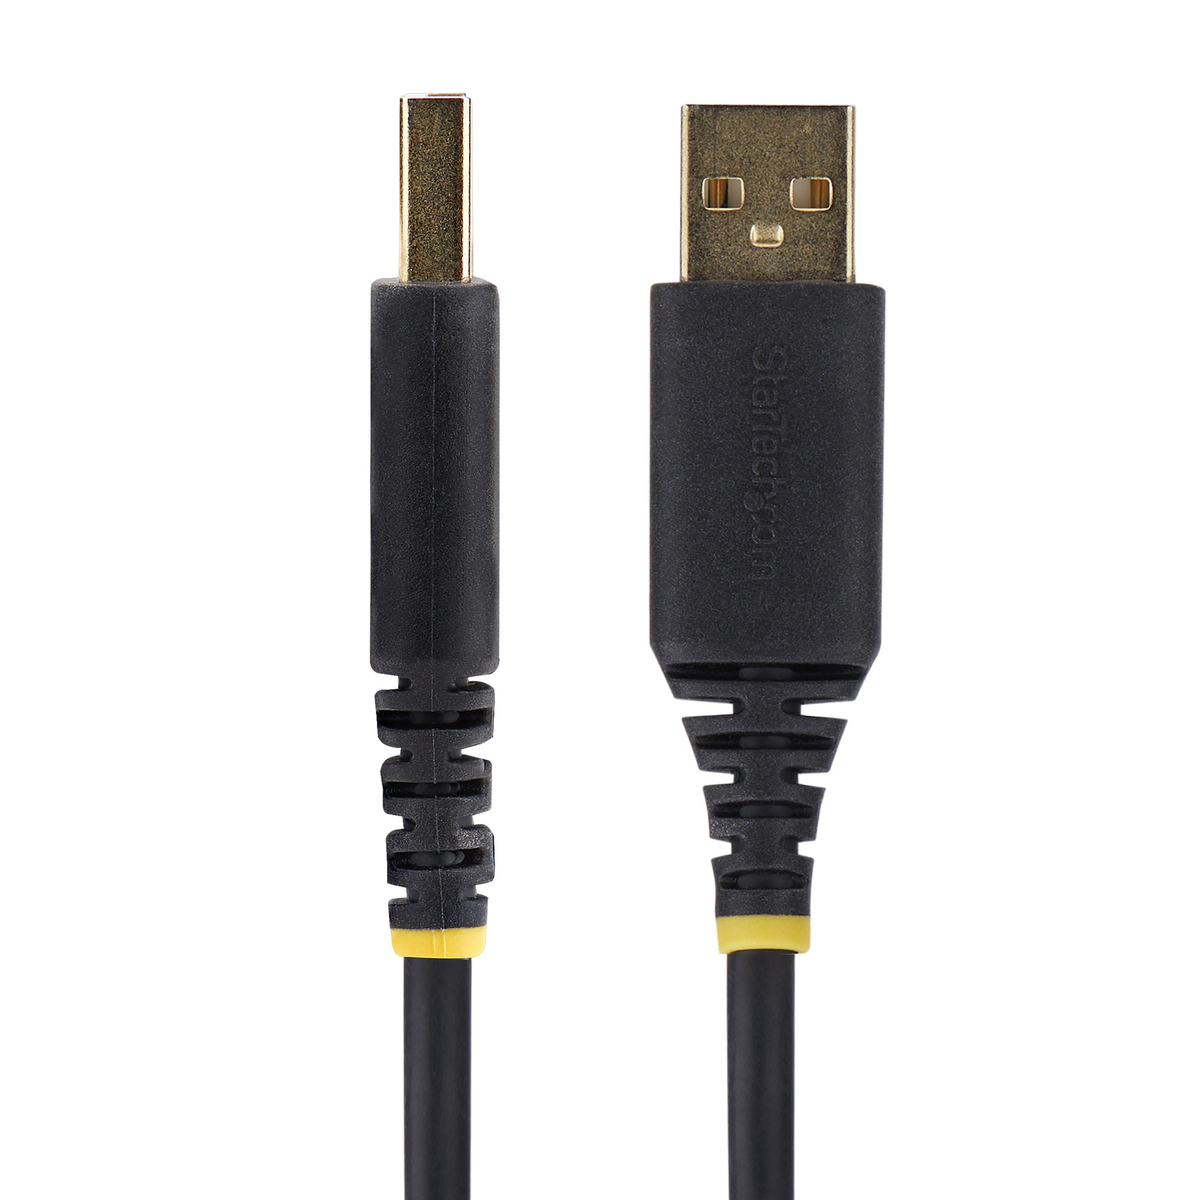 10ft/3m USB to RS232 Serial Adapter